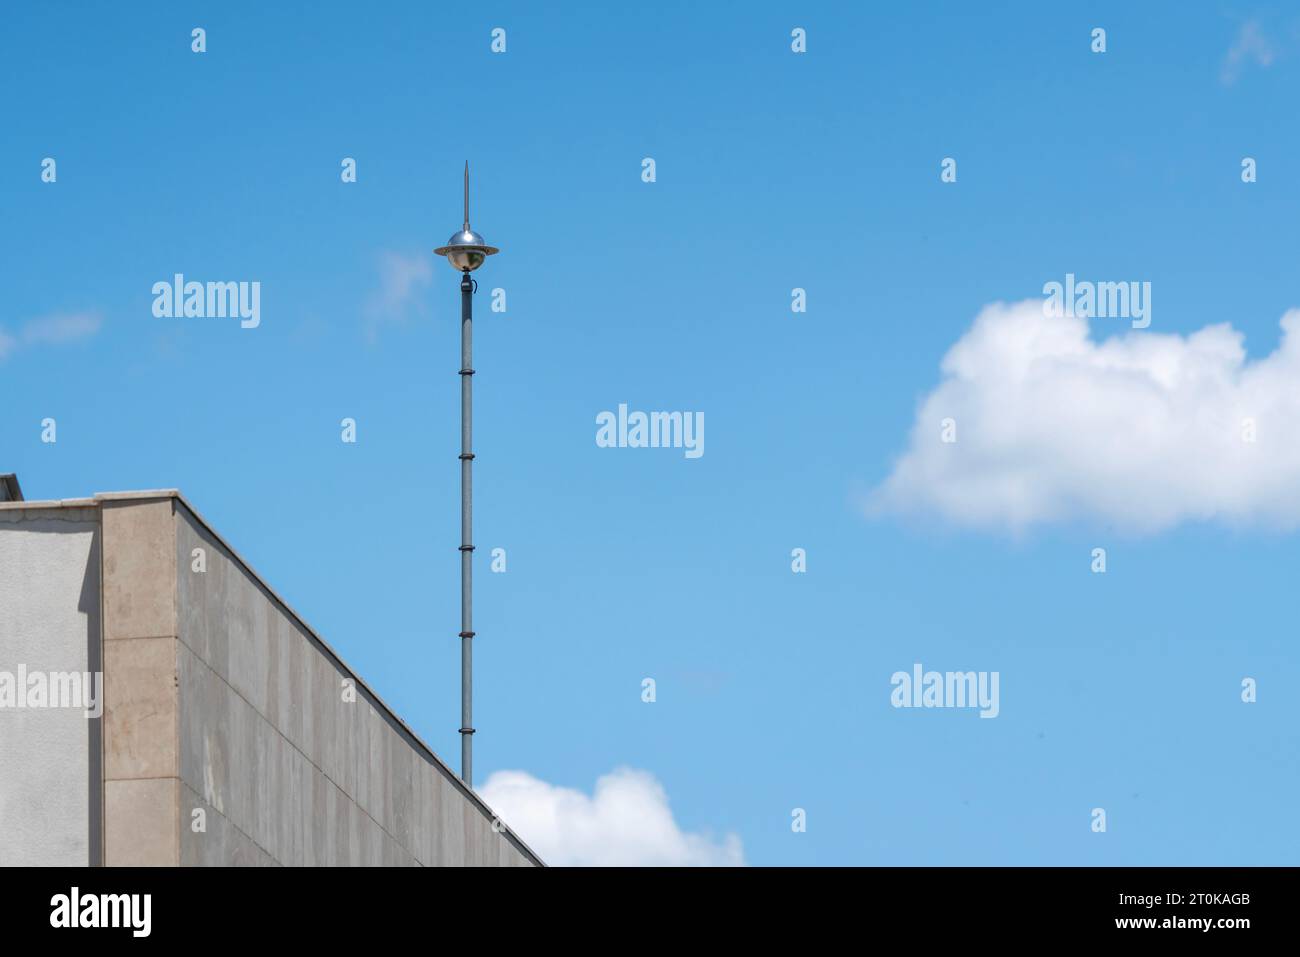 Lightning rod on the roof of a building against a blue sky. Lightning strike Stock Photo